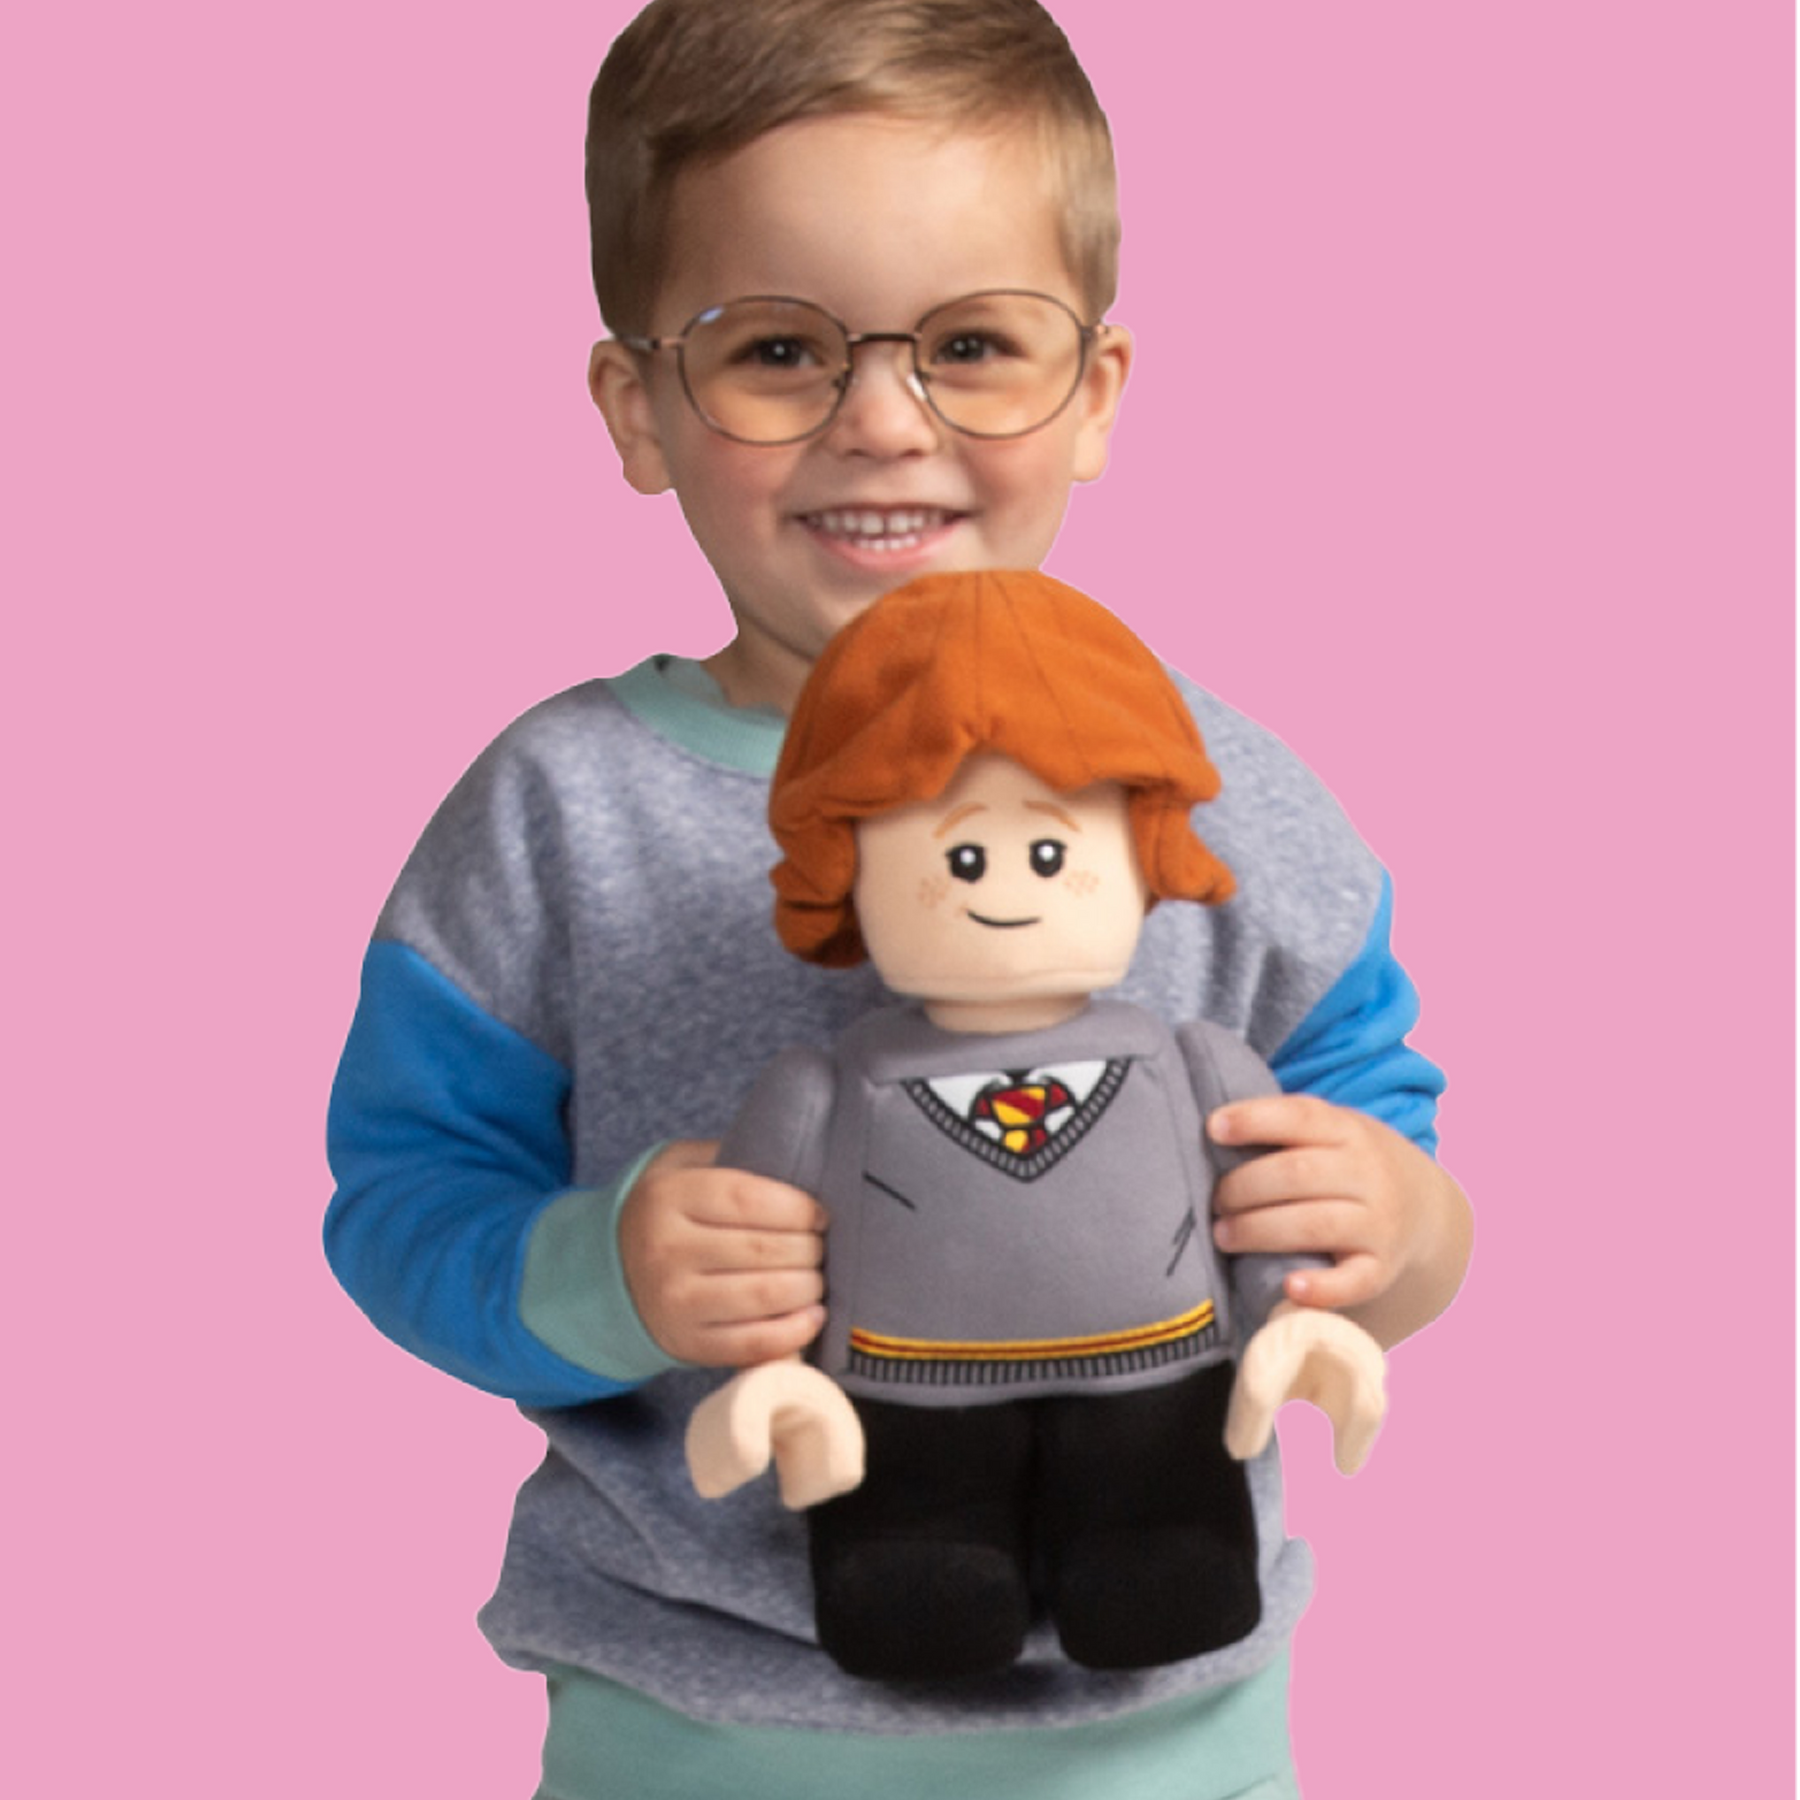 Boy in glasses playing with Hermione plush character doll